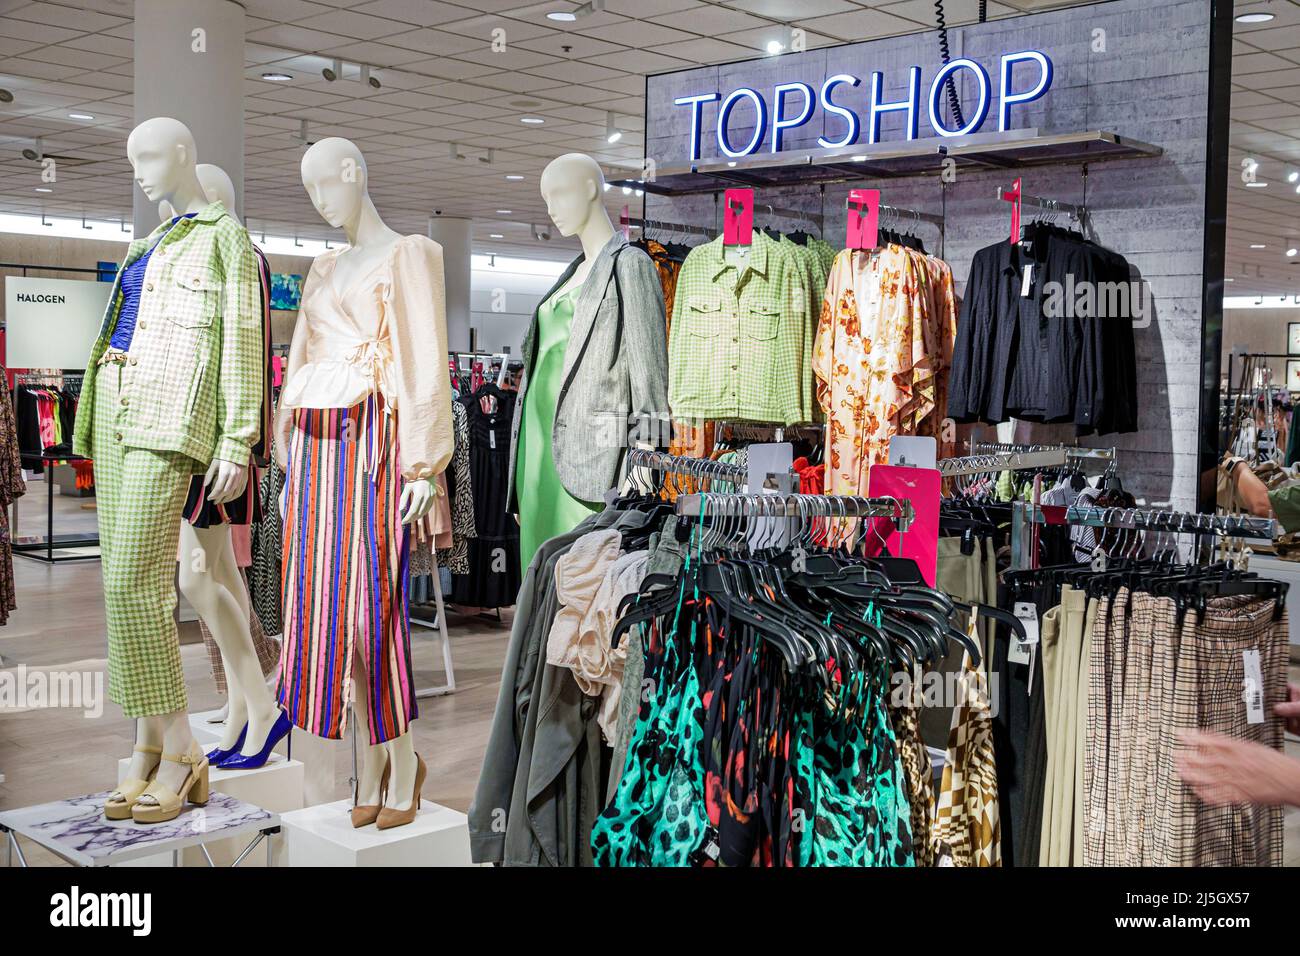 Miami Florida Coral Gables Shops at Merrick Park upscale outdoor shopping mall Nordstrom Department Store inside interior retail display sale TopShop Stock Photo